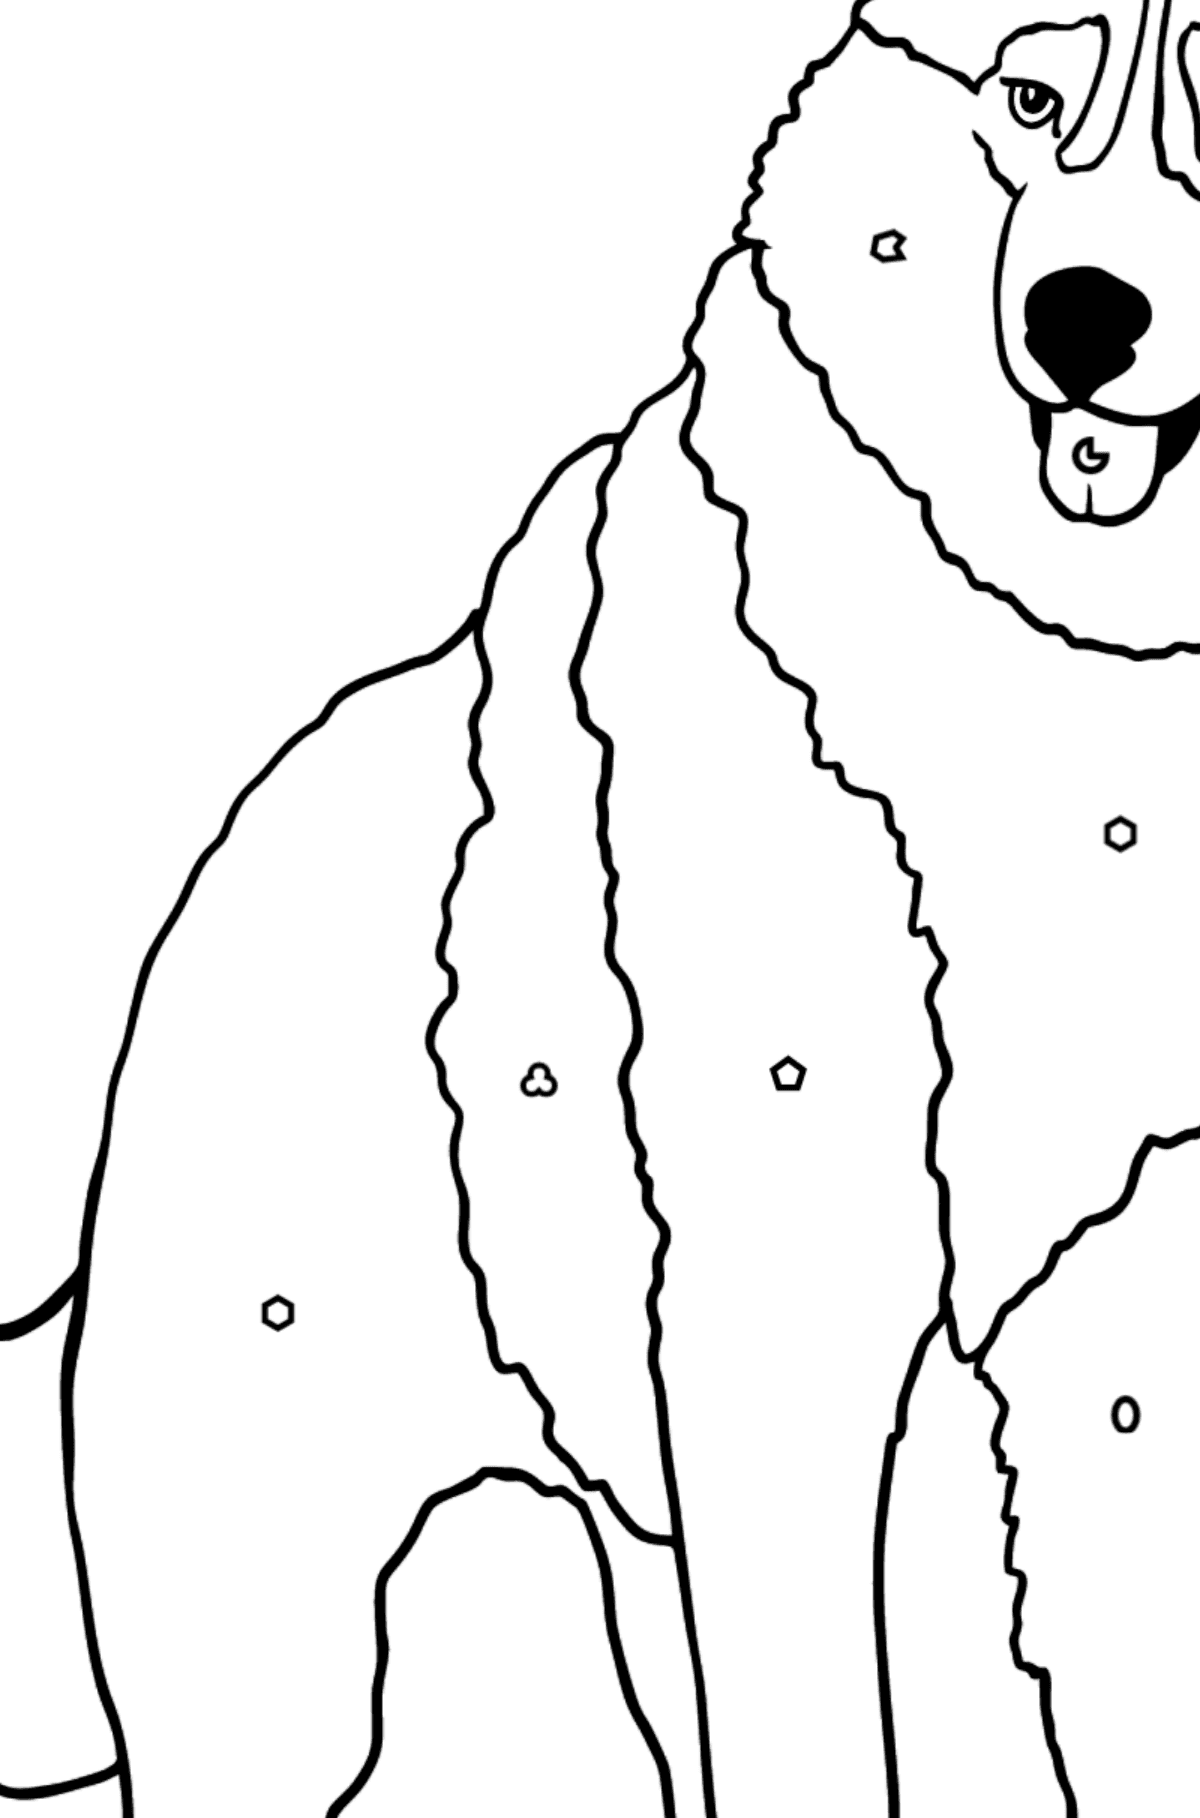 Husky coloring page - Coloring by Geometric Shapes for Kids